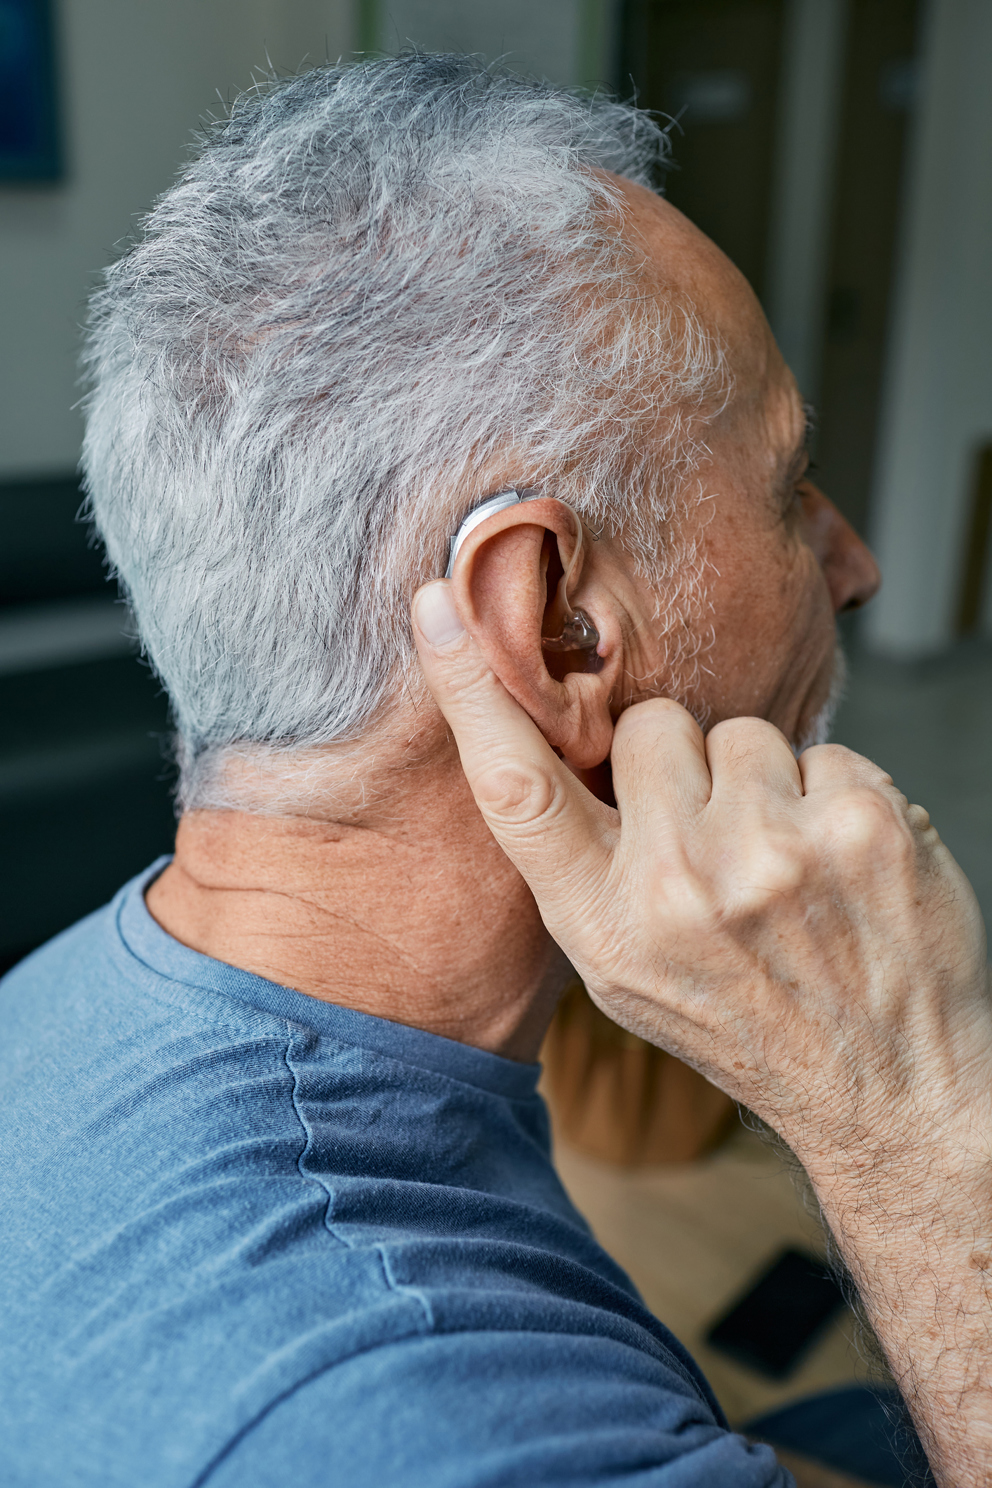 Hearing Aids Are Not Painful